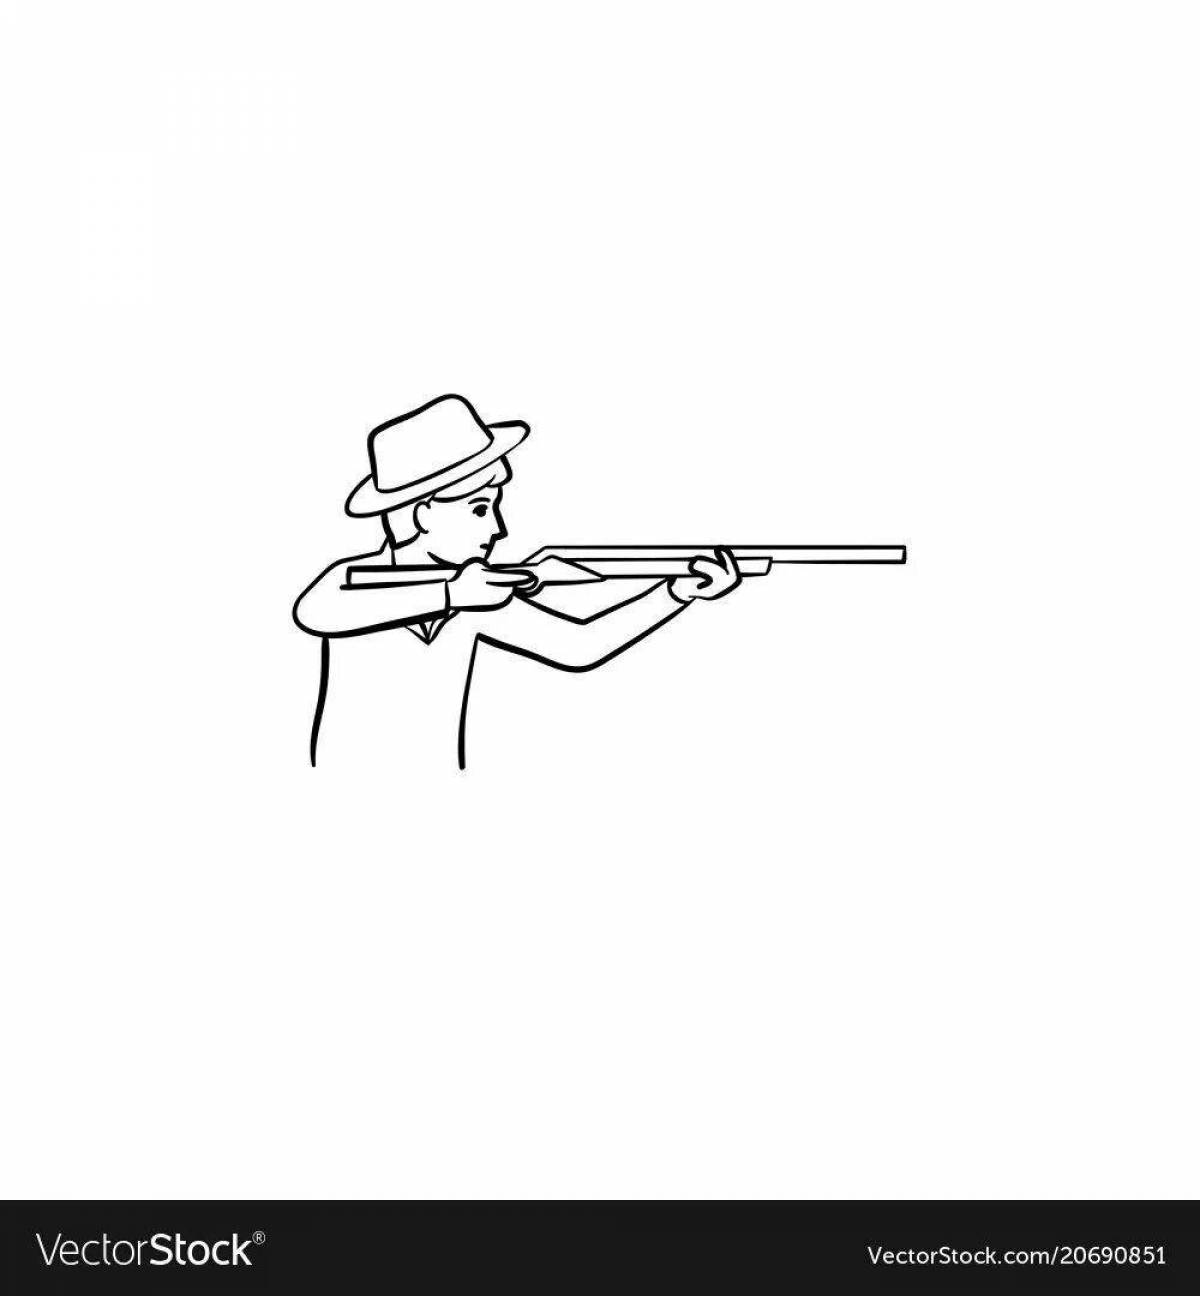 Charm of a hunter with a gun coloring book